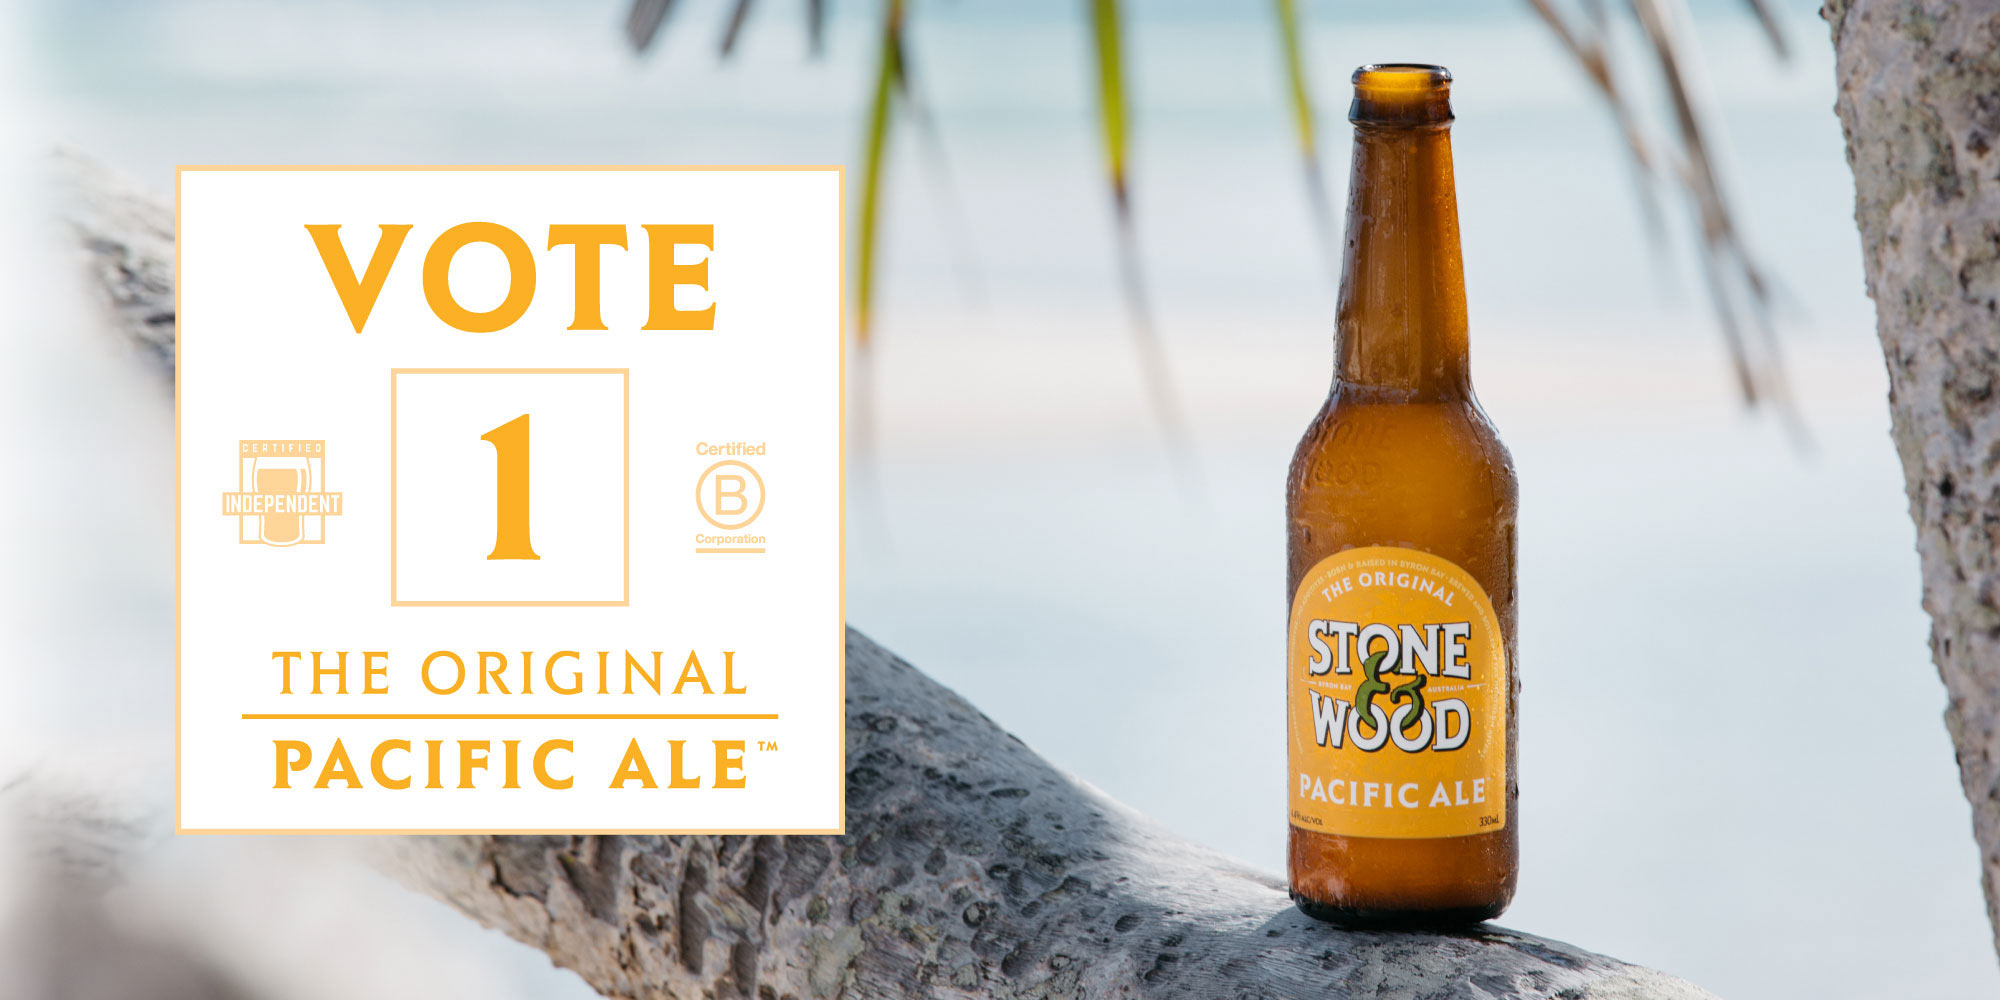 karakter klistermærke komedie تويتر \ stone & wood على تويتر: "VOTE 1 THE ORIGINAL PACIFIC ALE The  @gabsfestival Hottest 100 Countdown begins – Australia's biggest craft beer  poll! From today until Friday 17 January, we're